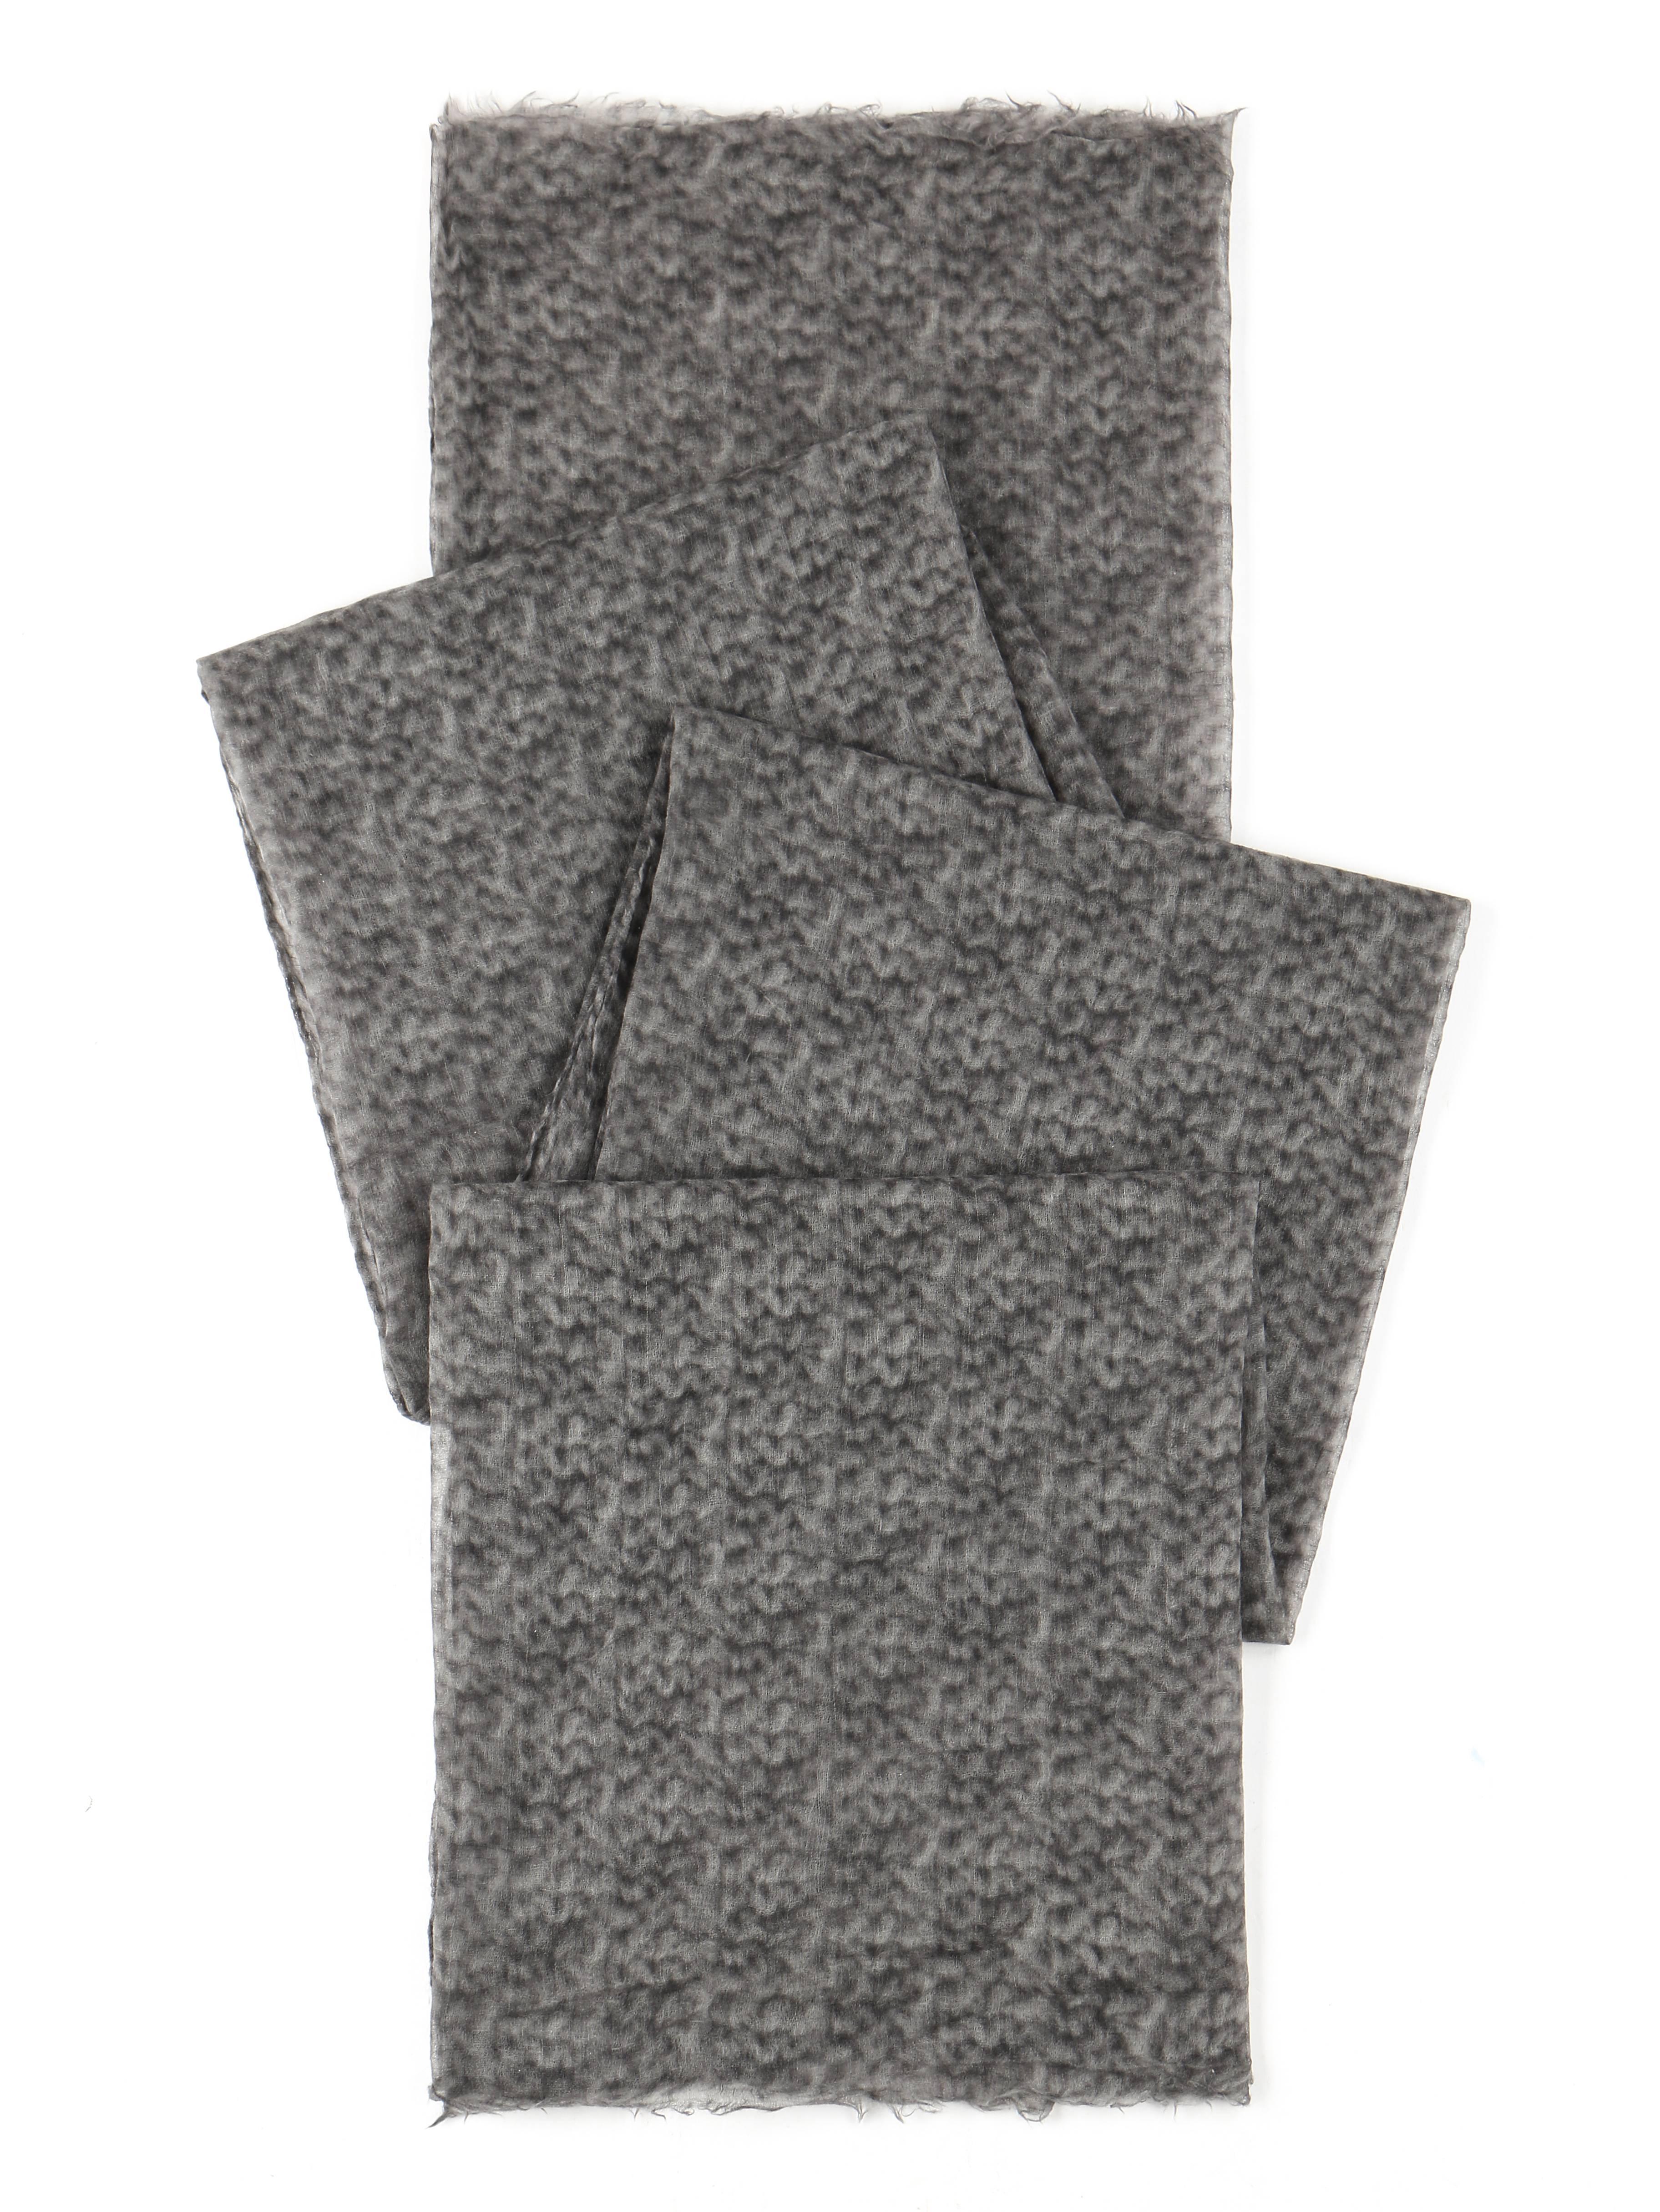 Brunello Cucinelli 100% Cashmere Gray Raw Rolled Edge Large Oblong Wrap Scarf

Brand / Manufacturer: Brunello Cucinelli 
Designer: Brunello Cucinelli
Style: Scarf
Color(s): Shades of grey
Marked Fabric Content: 100% cashmere 
Made In: